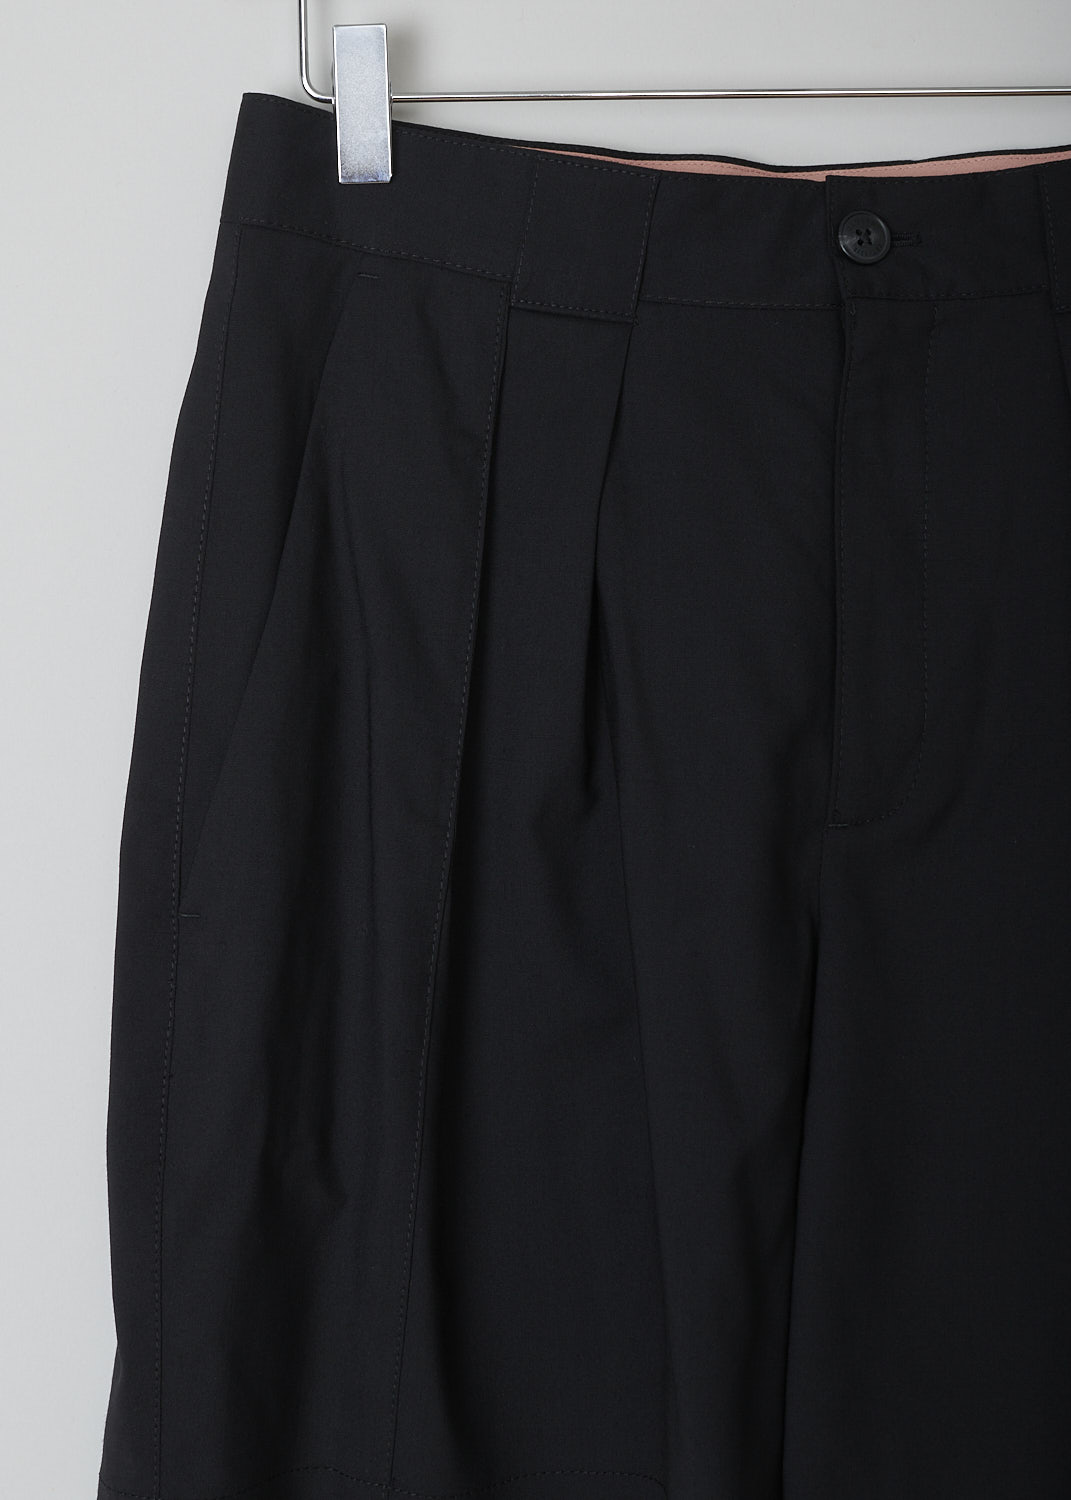 CLOSED, BLACK WOOL SHORTS, JOON_C92051_35H_22_100, Black, Detail, These high-waisted black wool shorts have a waistband with belt loops and a button and zipper closure. Subtle knife pleats decorate the front. These shorts have slanted pockets in the front and a single buttoned patch pocket in the back.   
